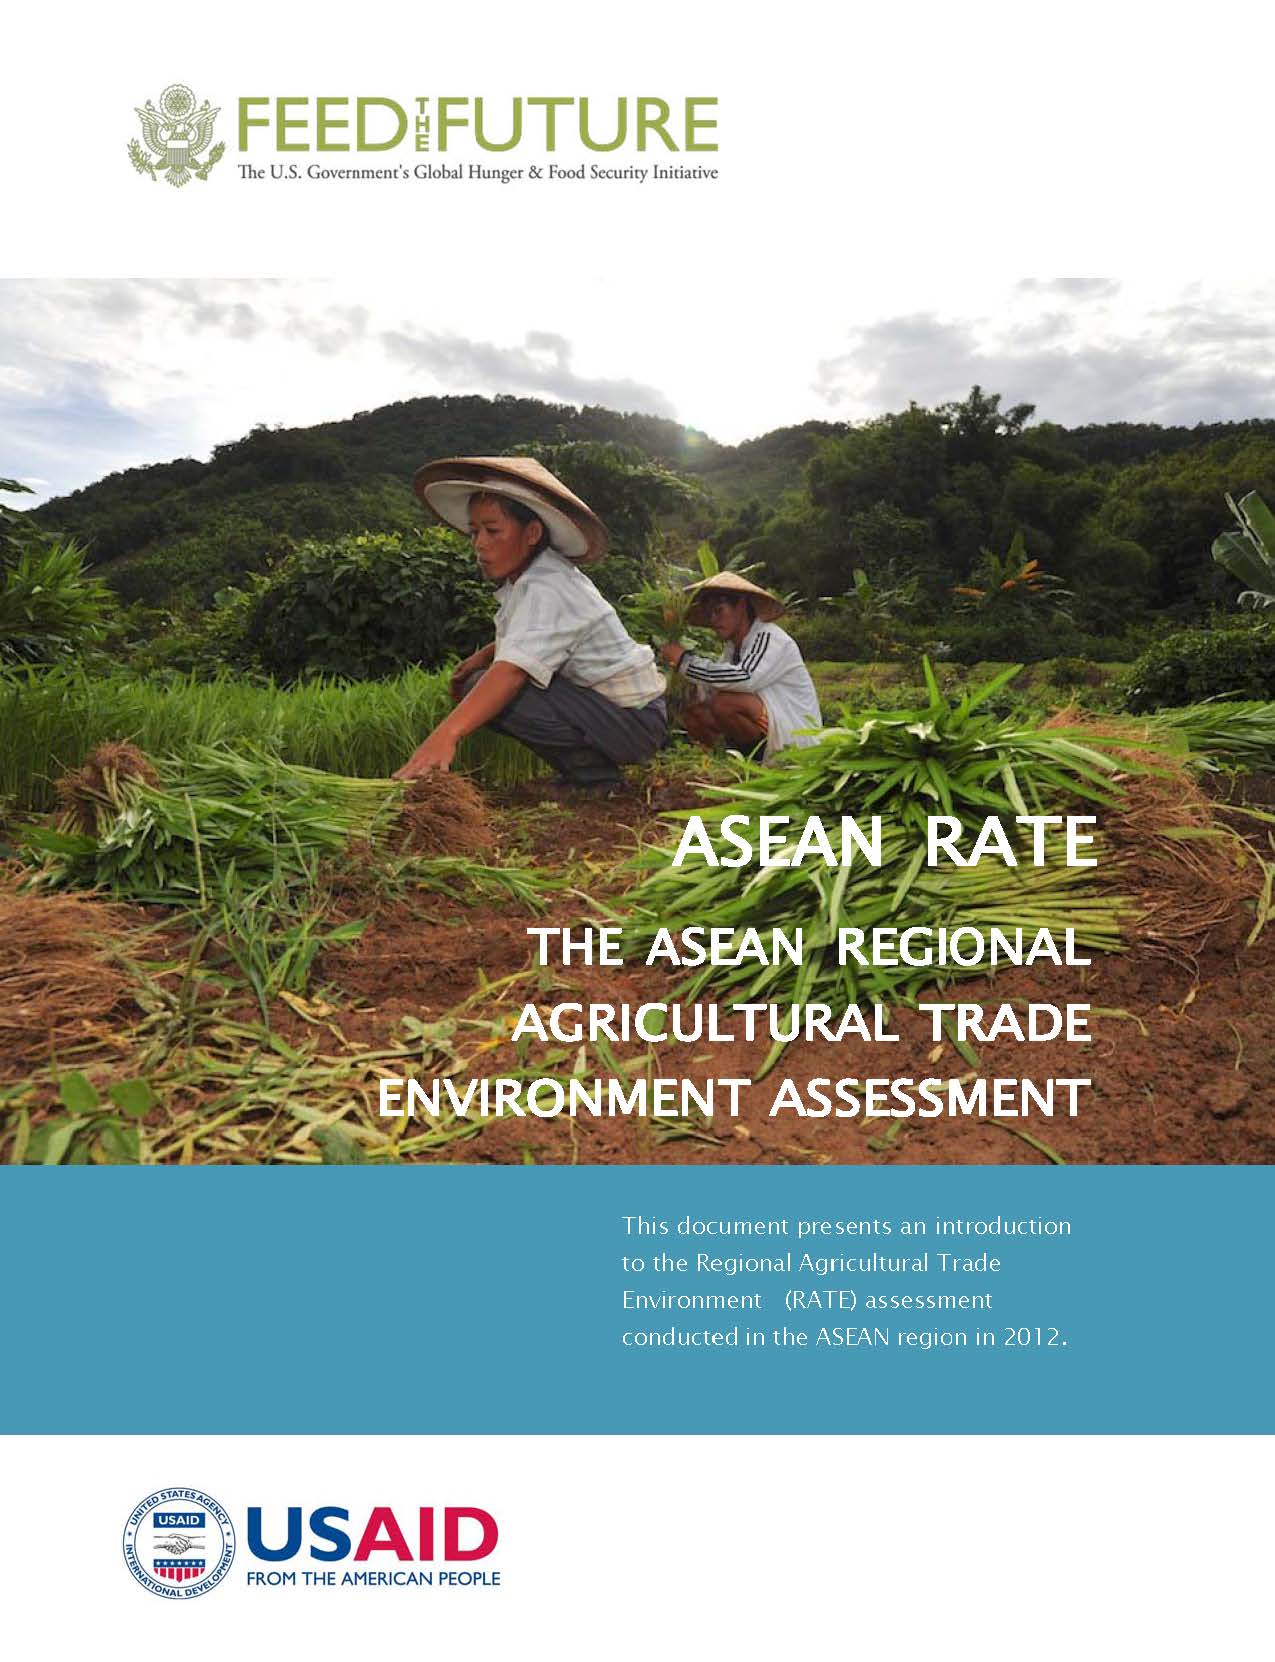 ASEAN Regional Agricultural Trade Environment Assessment: Introduction